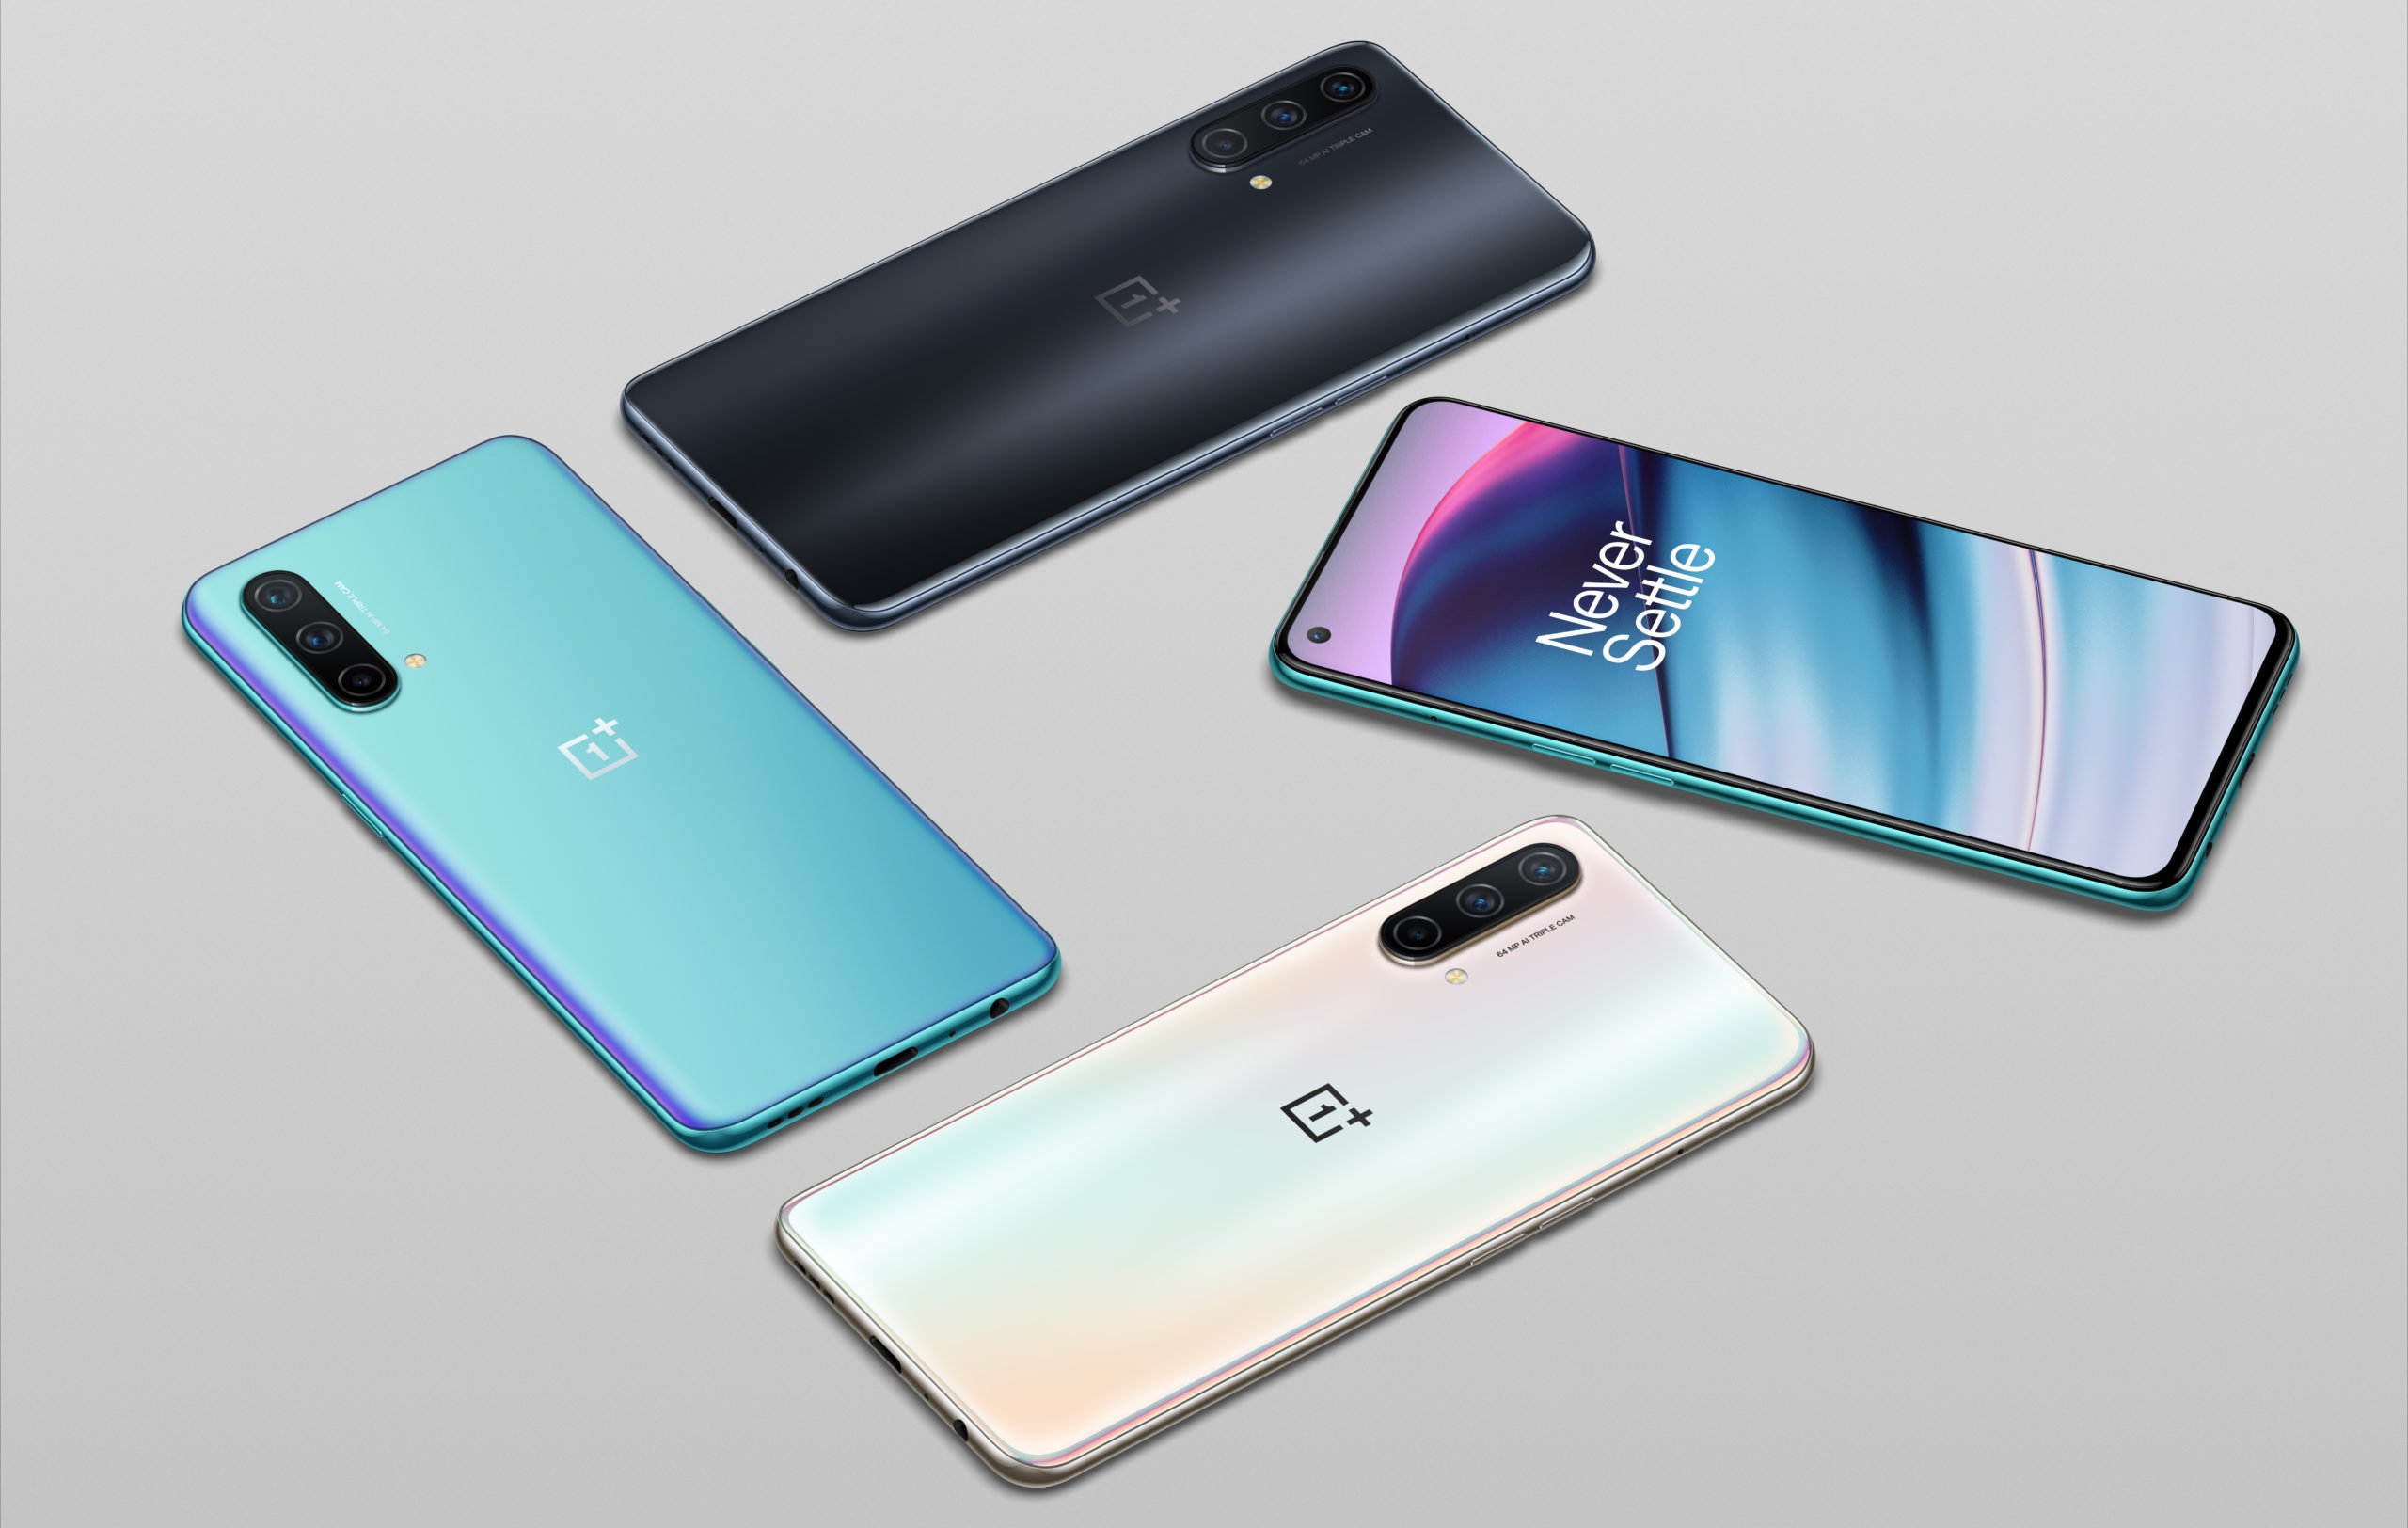 OnePlus Nord CE 5G with 90 Hz screen, NFC and Snapdragon 750G chip starts selling in Europe for 330 euros